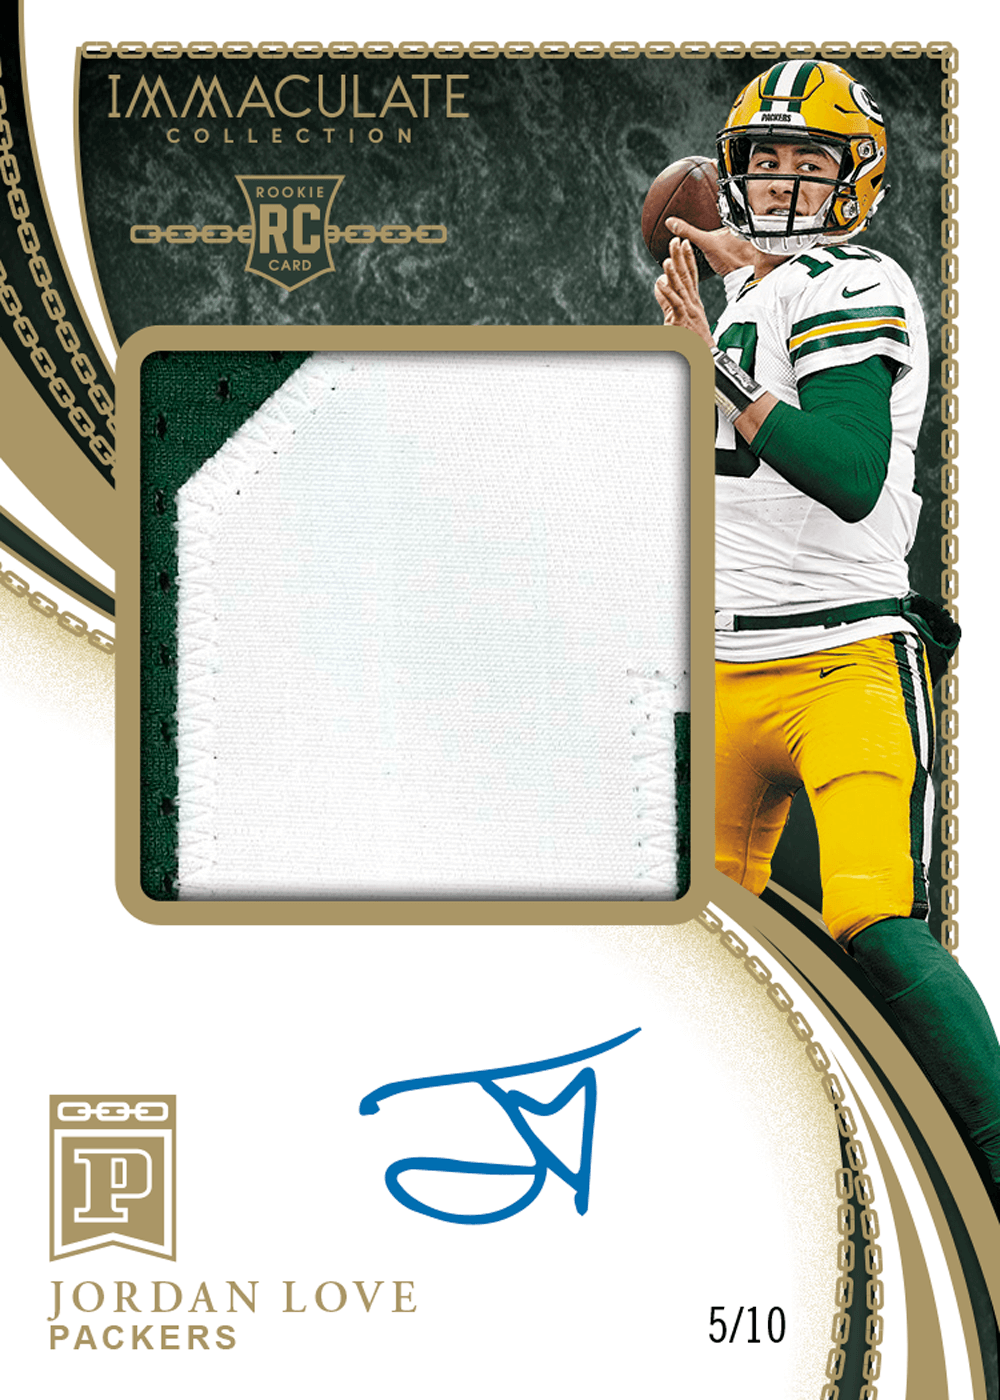 2020 Panini Immaculate Collection Football - BC Premium Patch Rookie  Autographs #4 - Jordan Love [5/10]